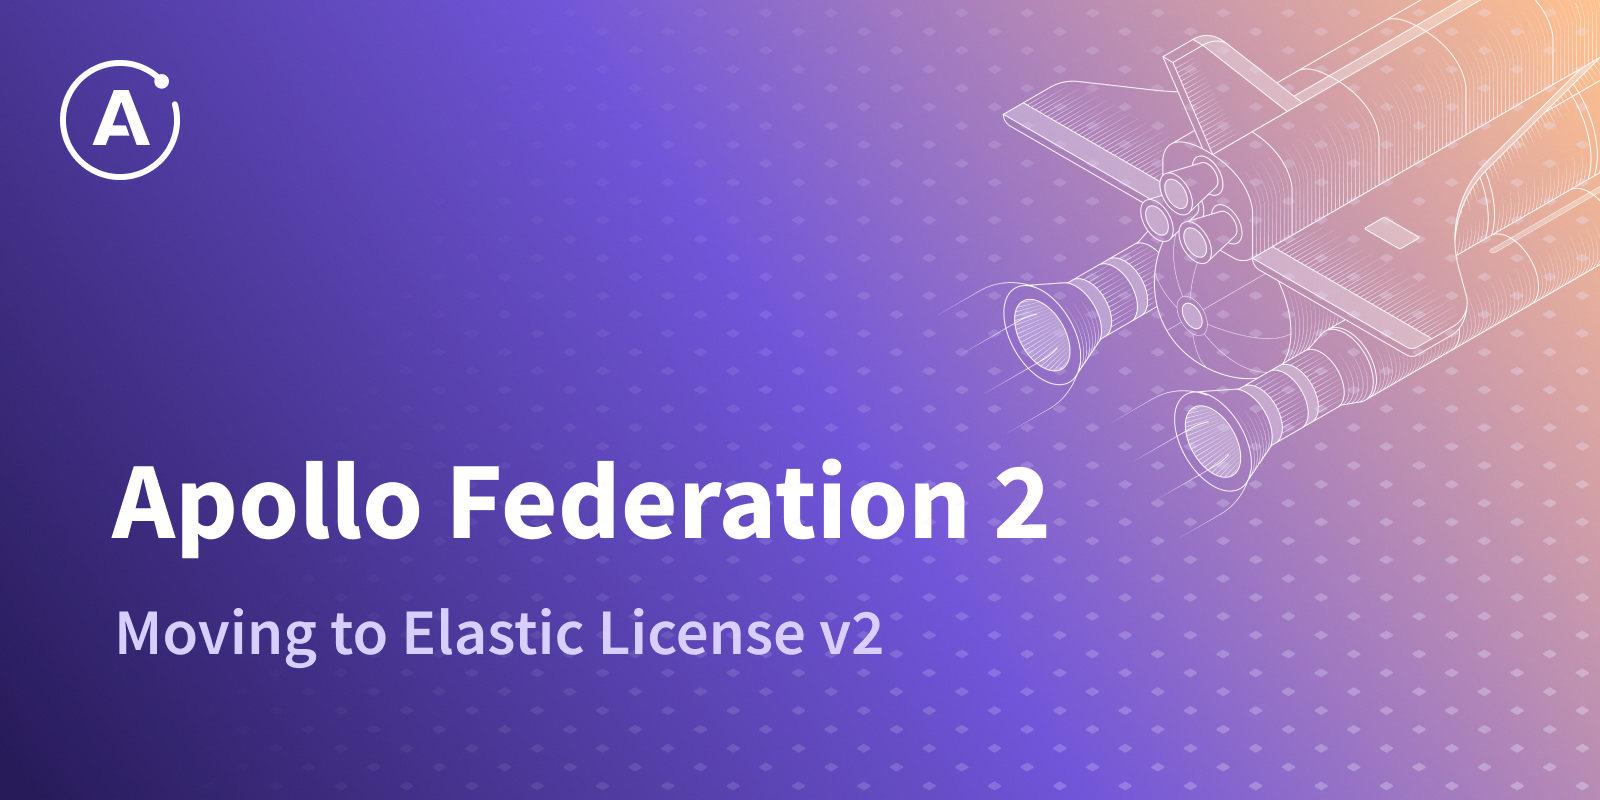 Moving Apollo Federation 2 to the Elastic License v2